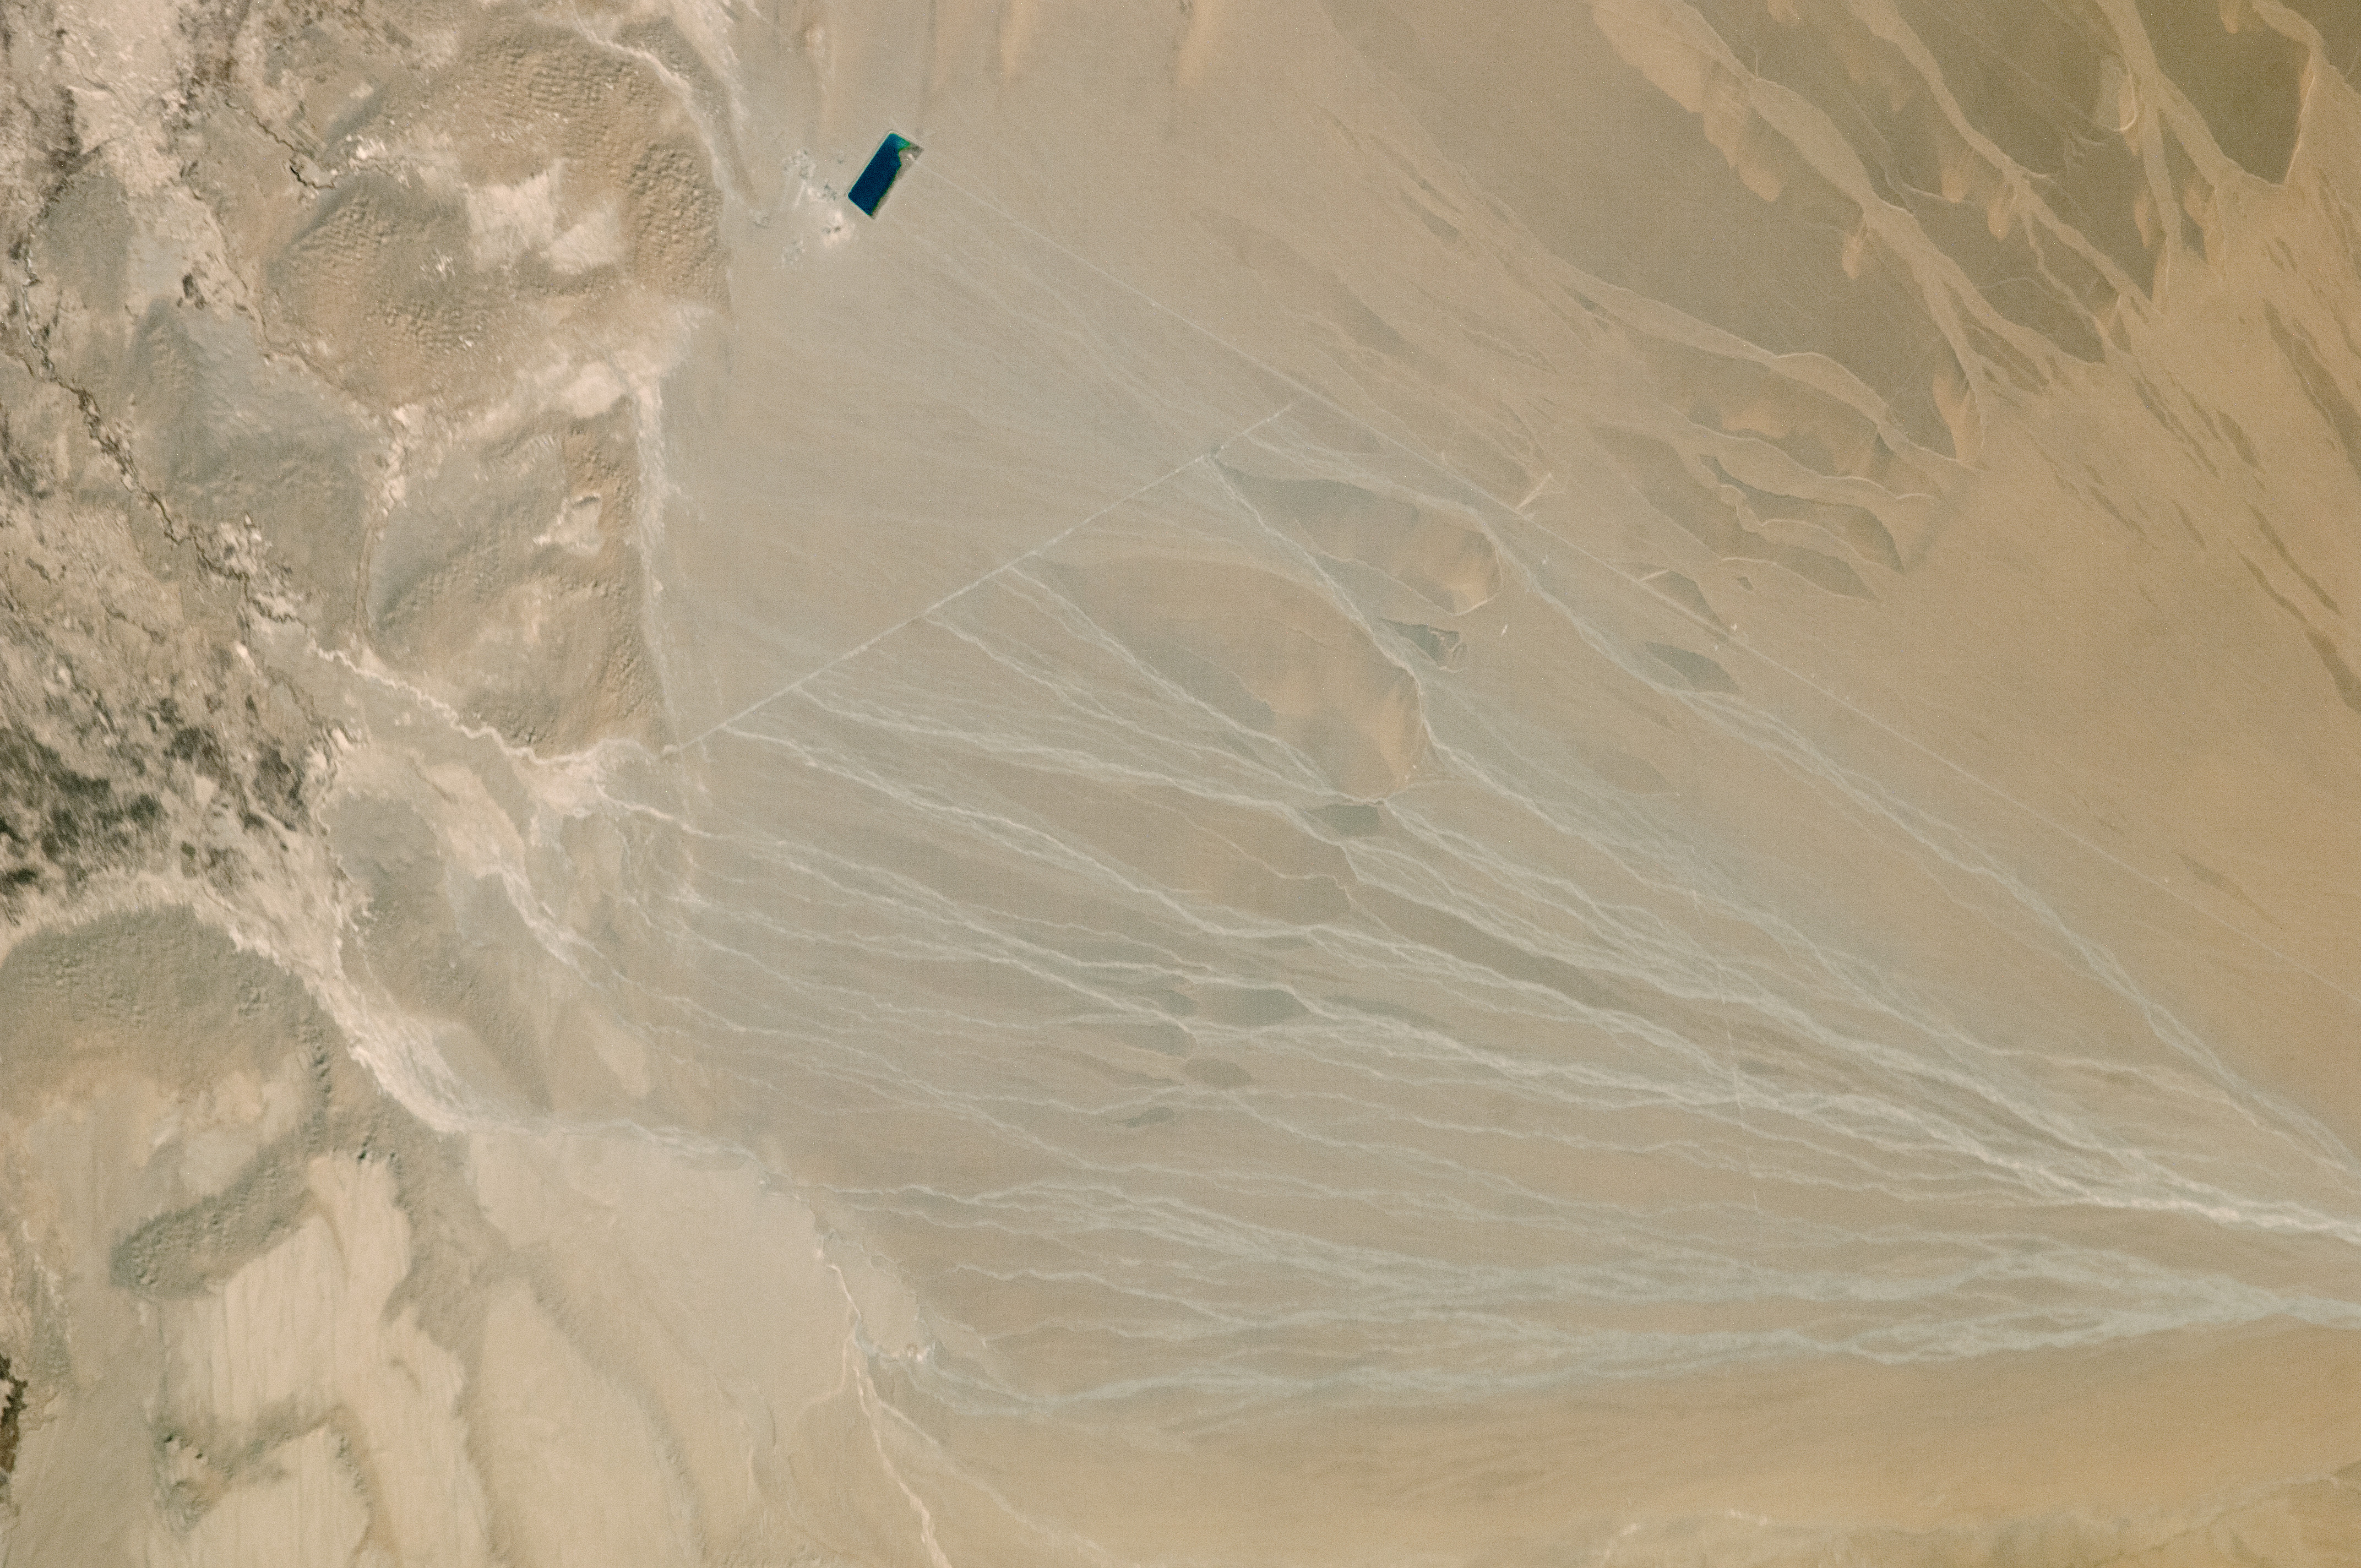 Alluvial Fan, Taklimakan Desert - related image preview